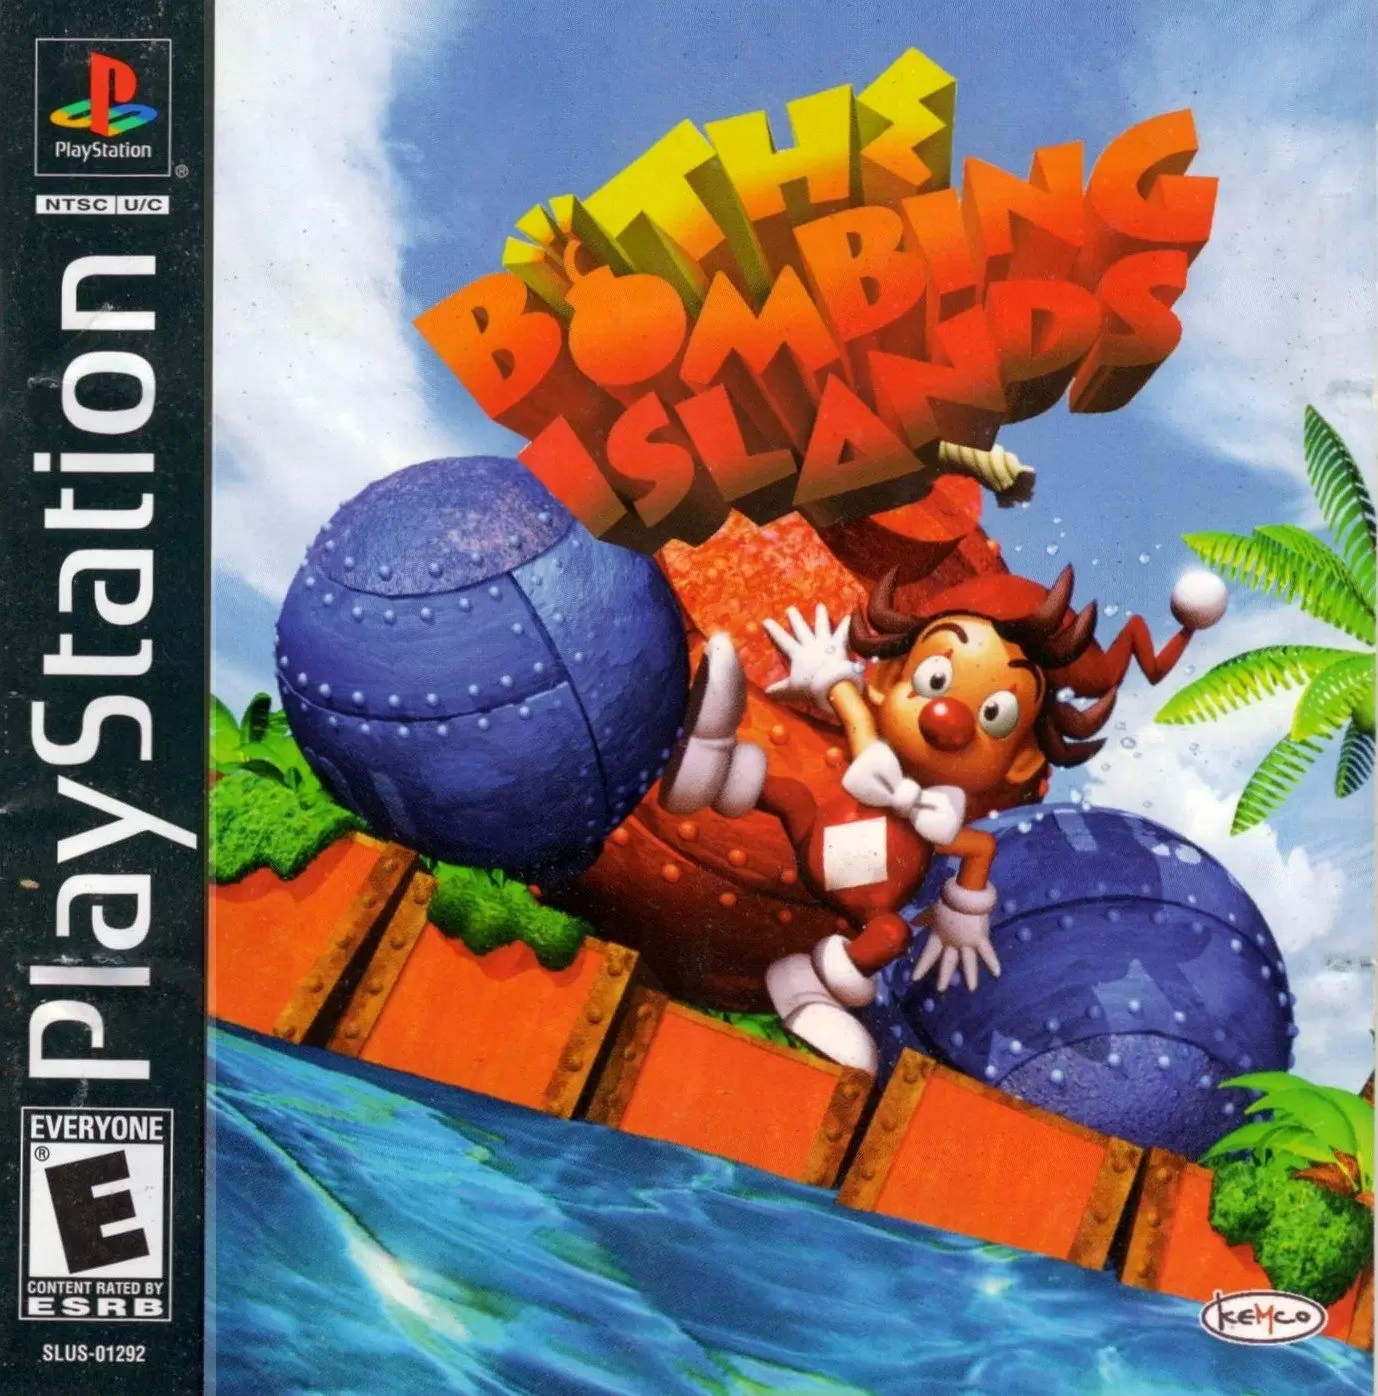 Jeux Playstation PS1 - The Bombing Islands